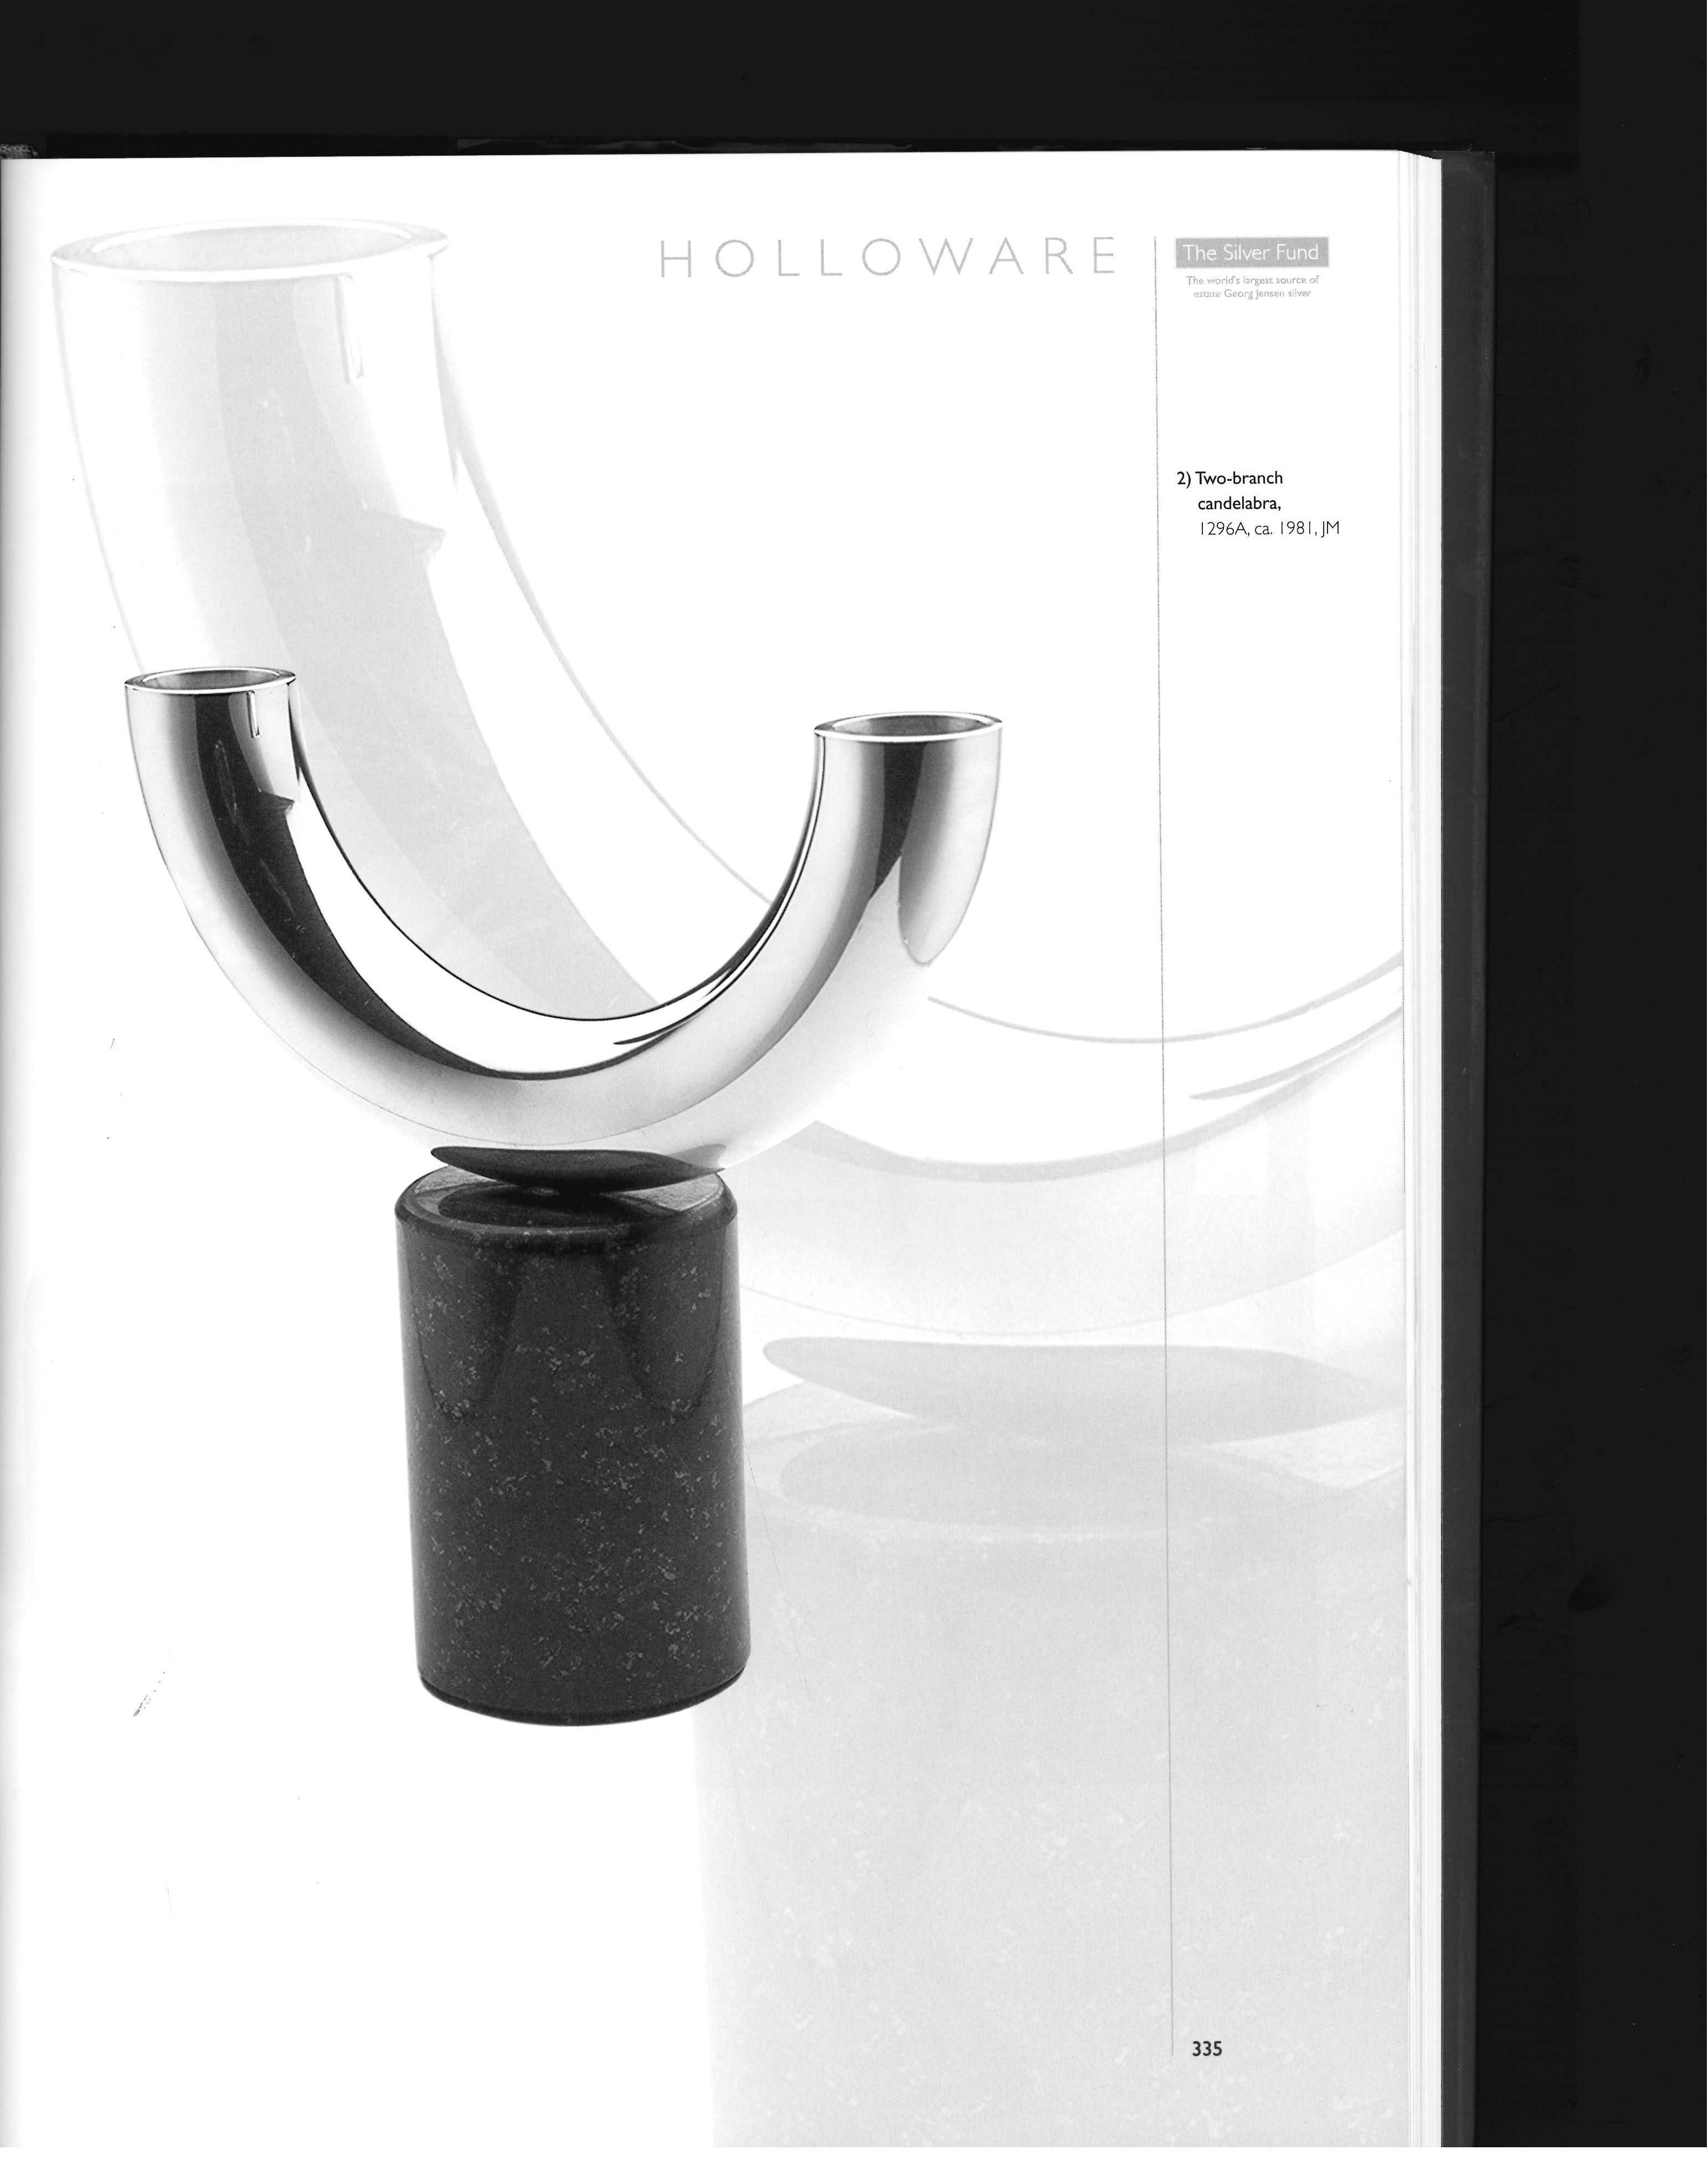 Georg Jensen: Holloware The Silver Fund Collection Book) For Sale 2